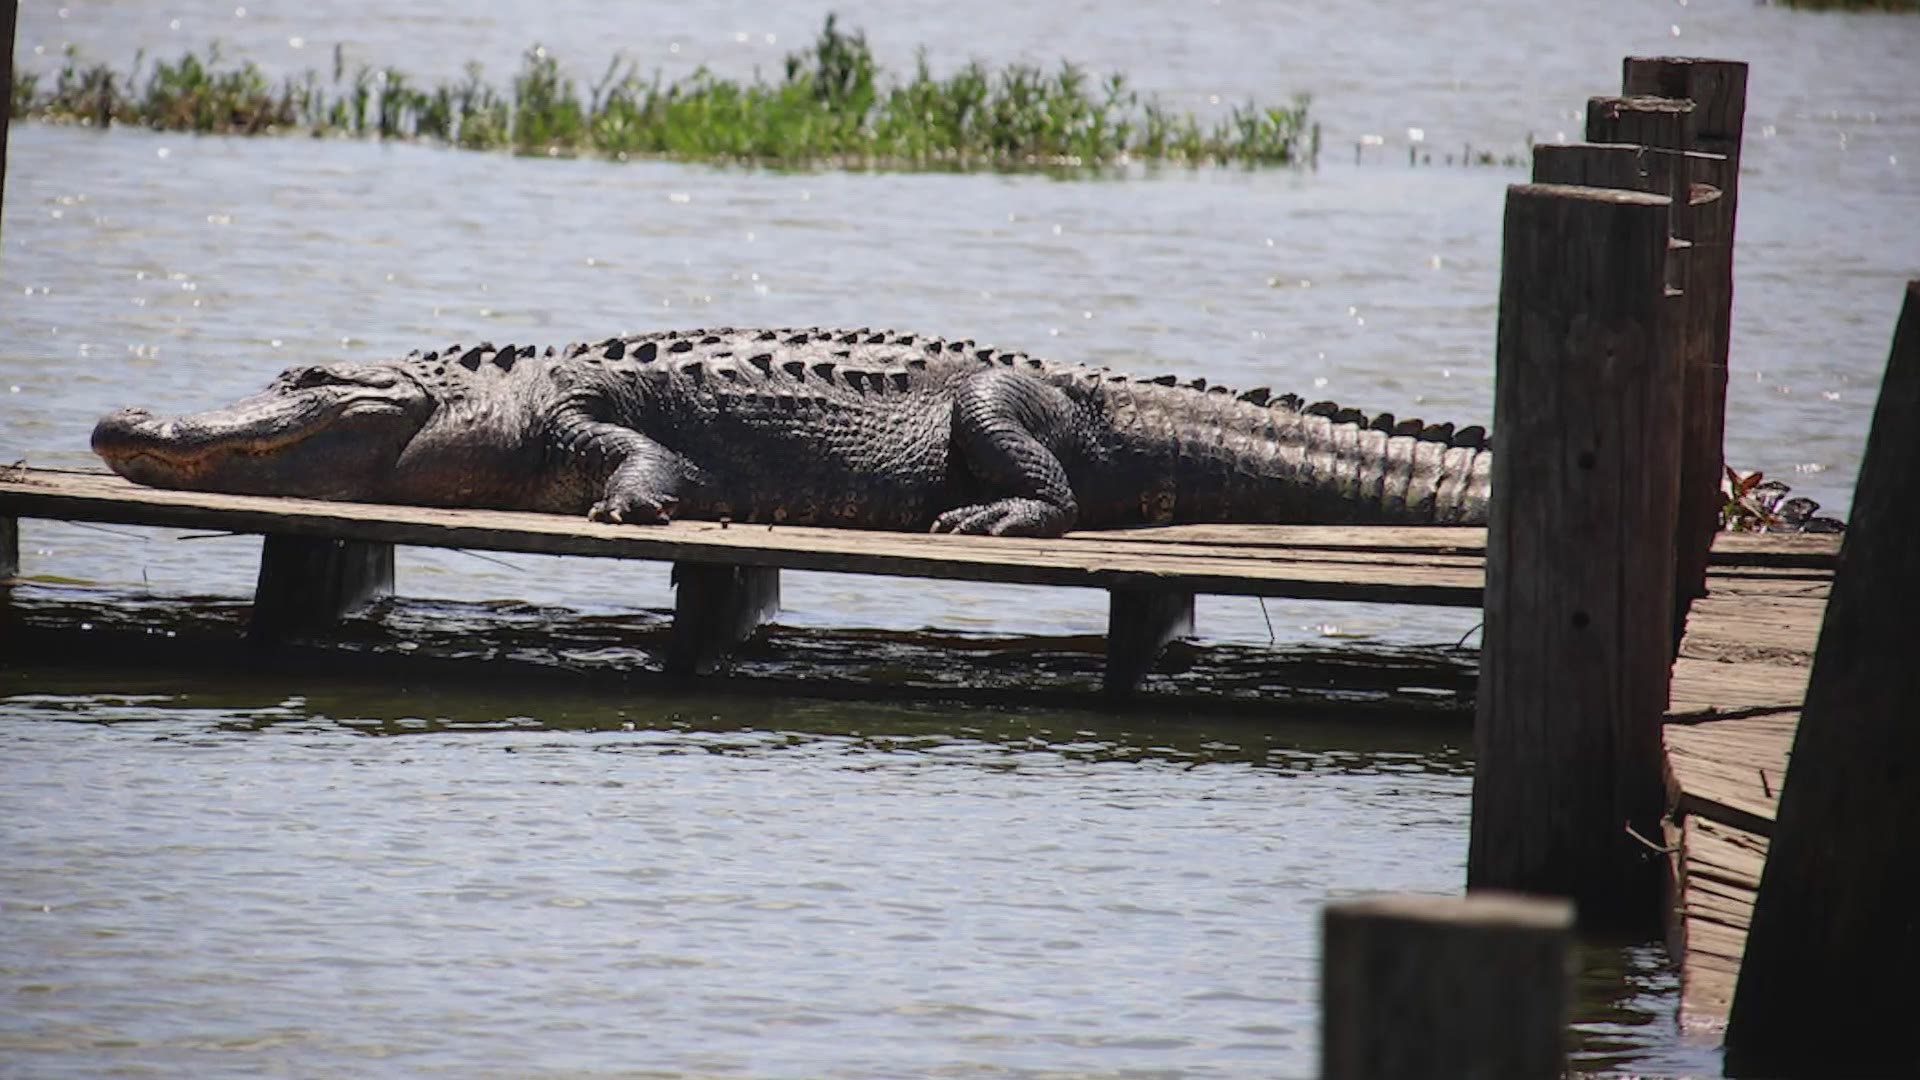 Alligators spotted at Lake Worth over Memorial Day Weekend | wfaa.com